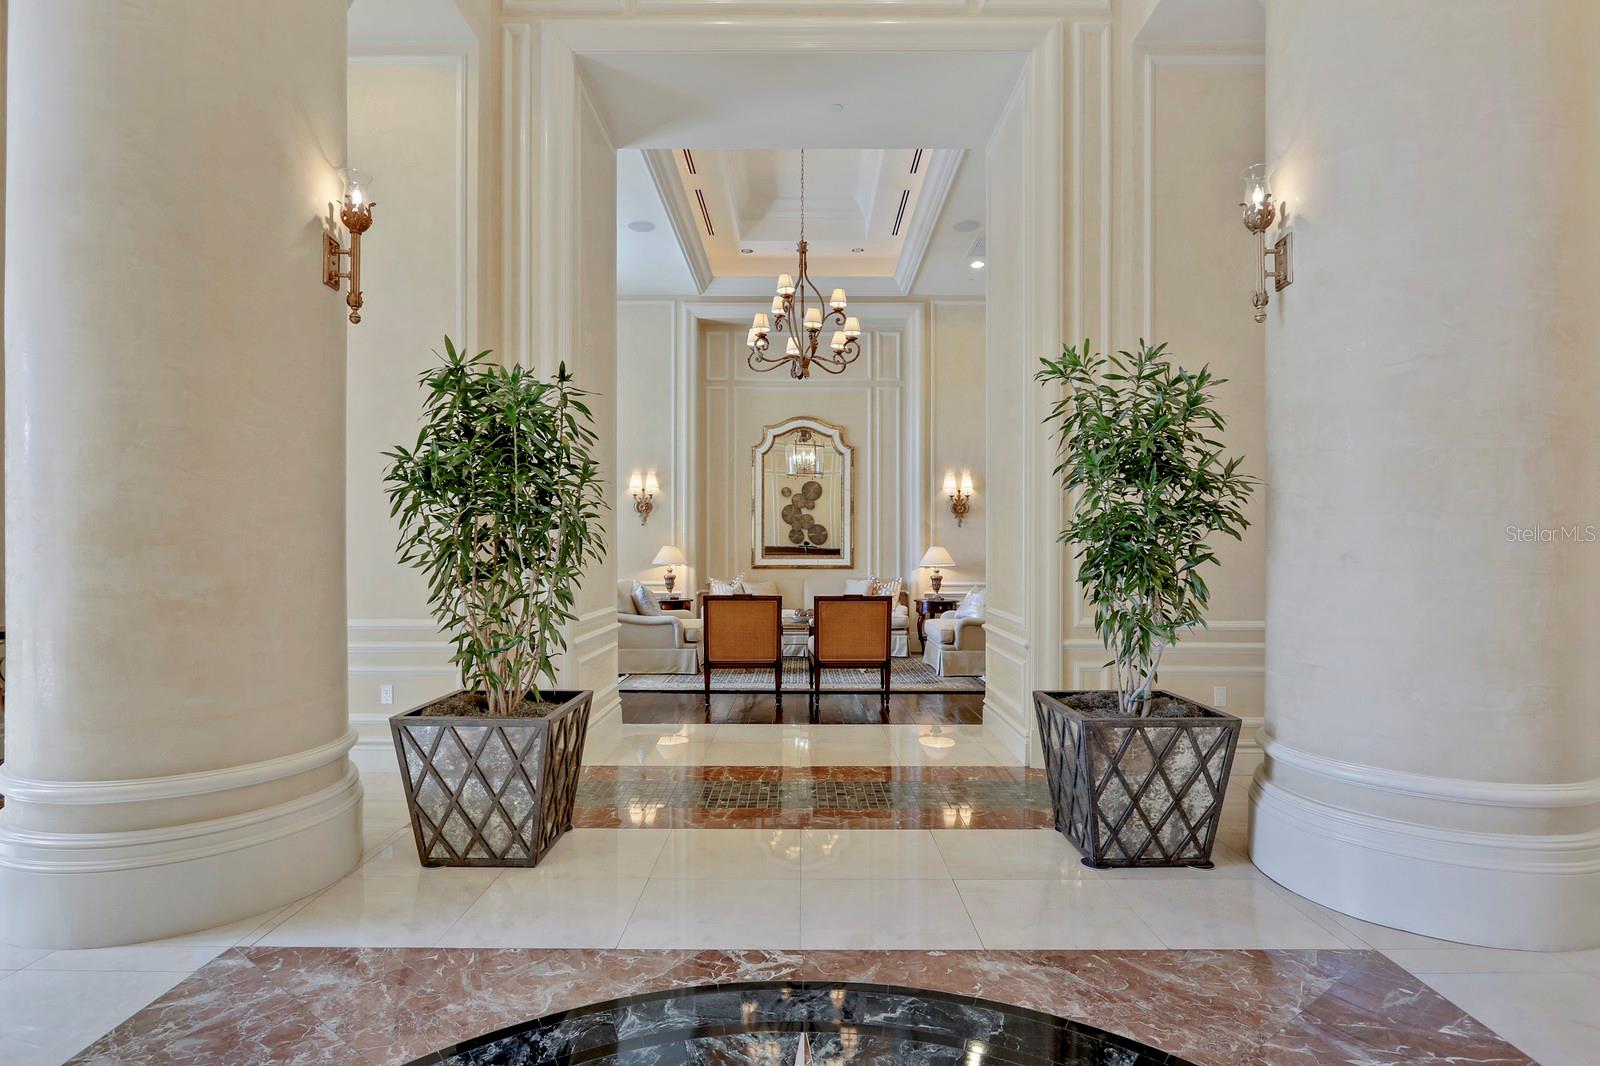 Once you enter the luxurious lobby, there is a lovely sitting room to the left for your guests or clients to enjoy.